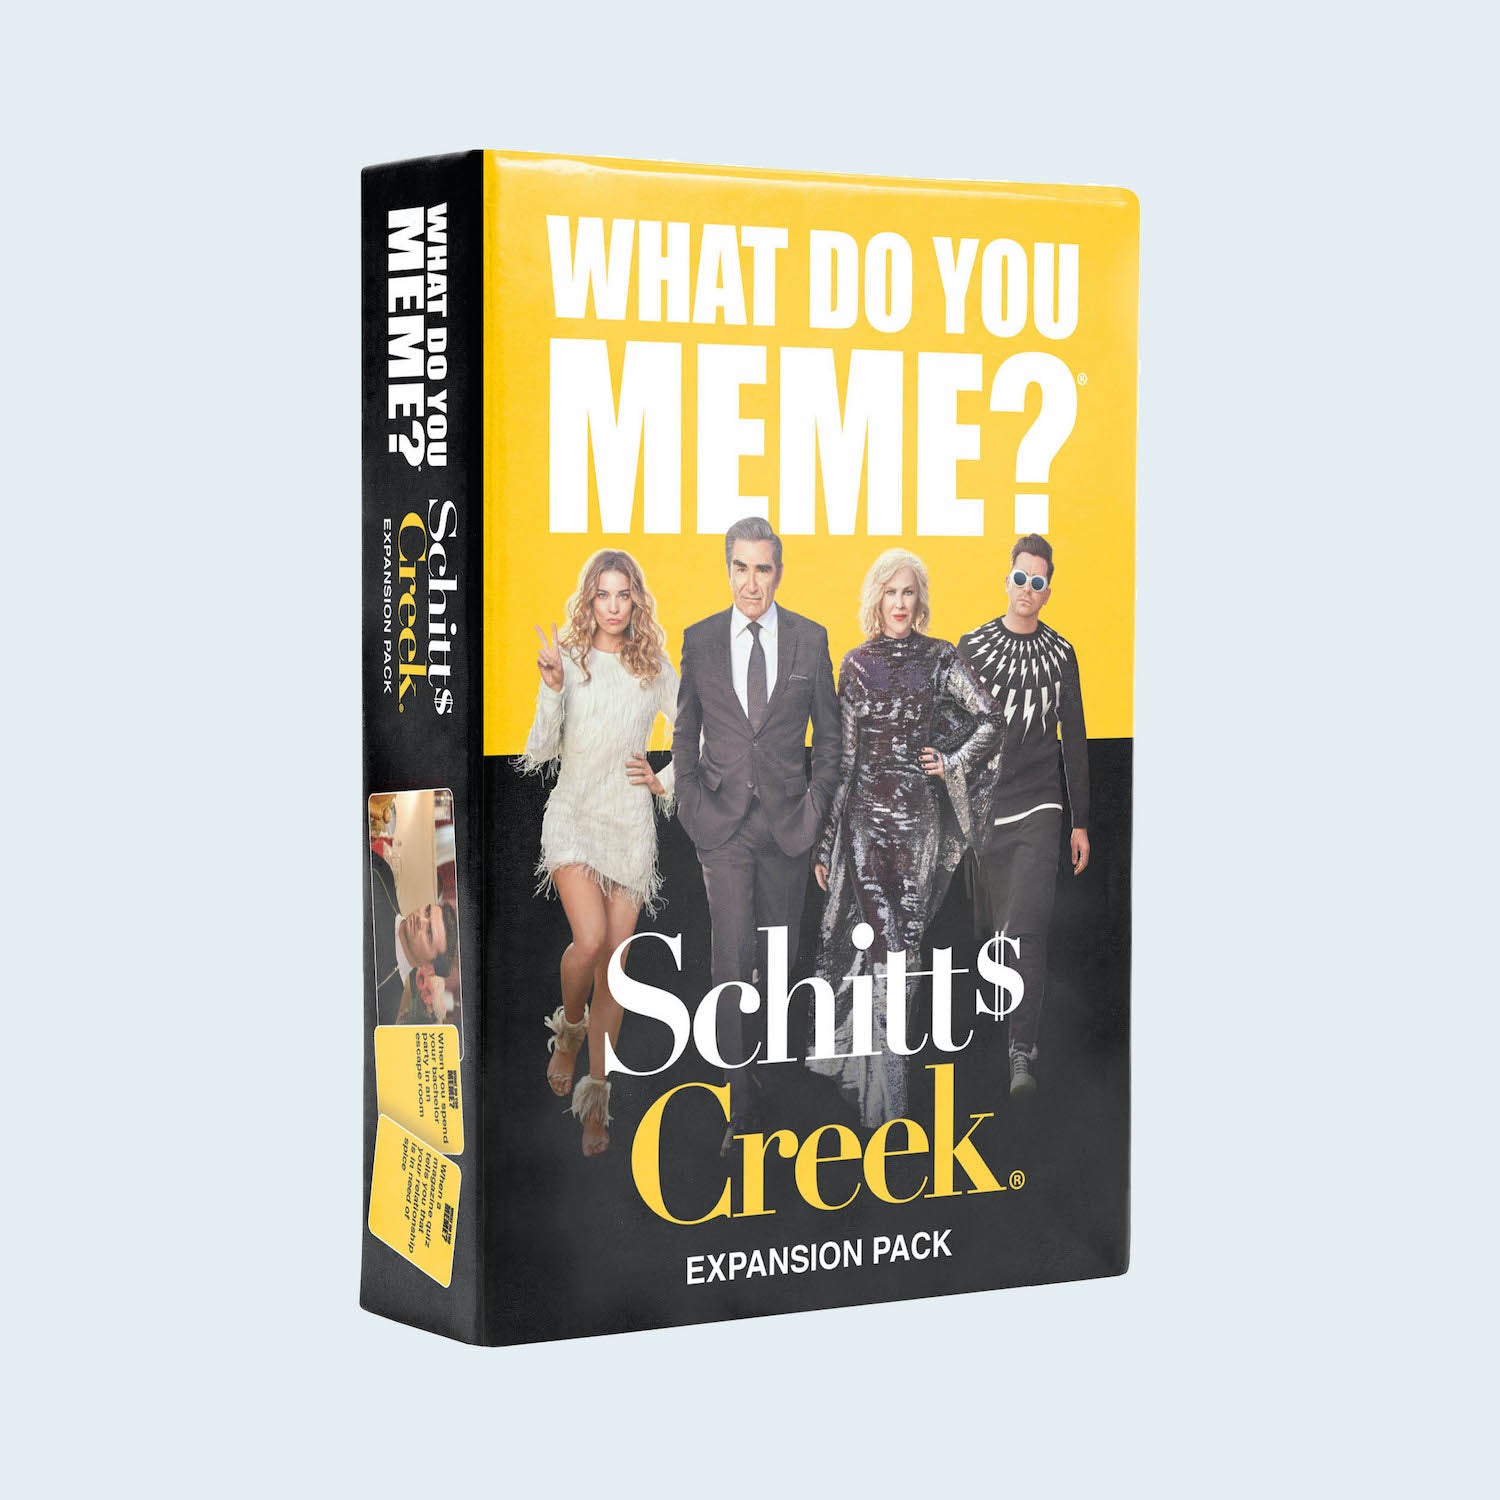 what-do-you-meme-schitt-s-creek-expansion-pack-game-box-and-game-play-02-what-do-you-meme-by-relatable